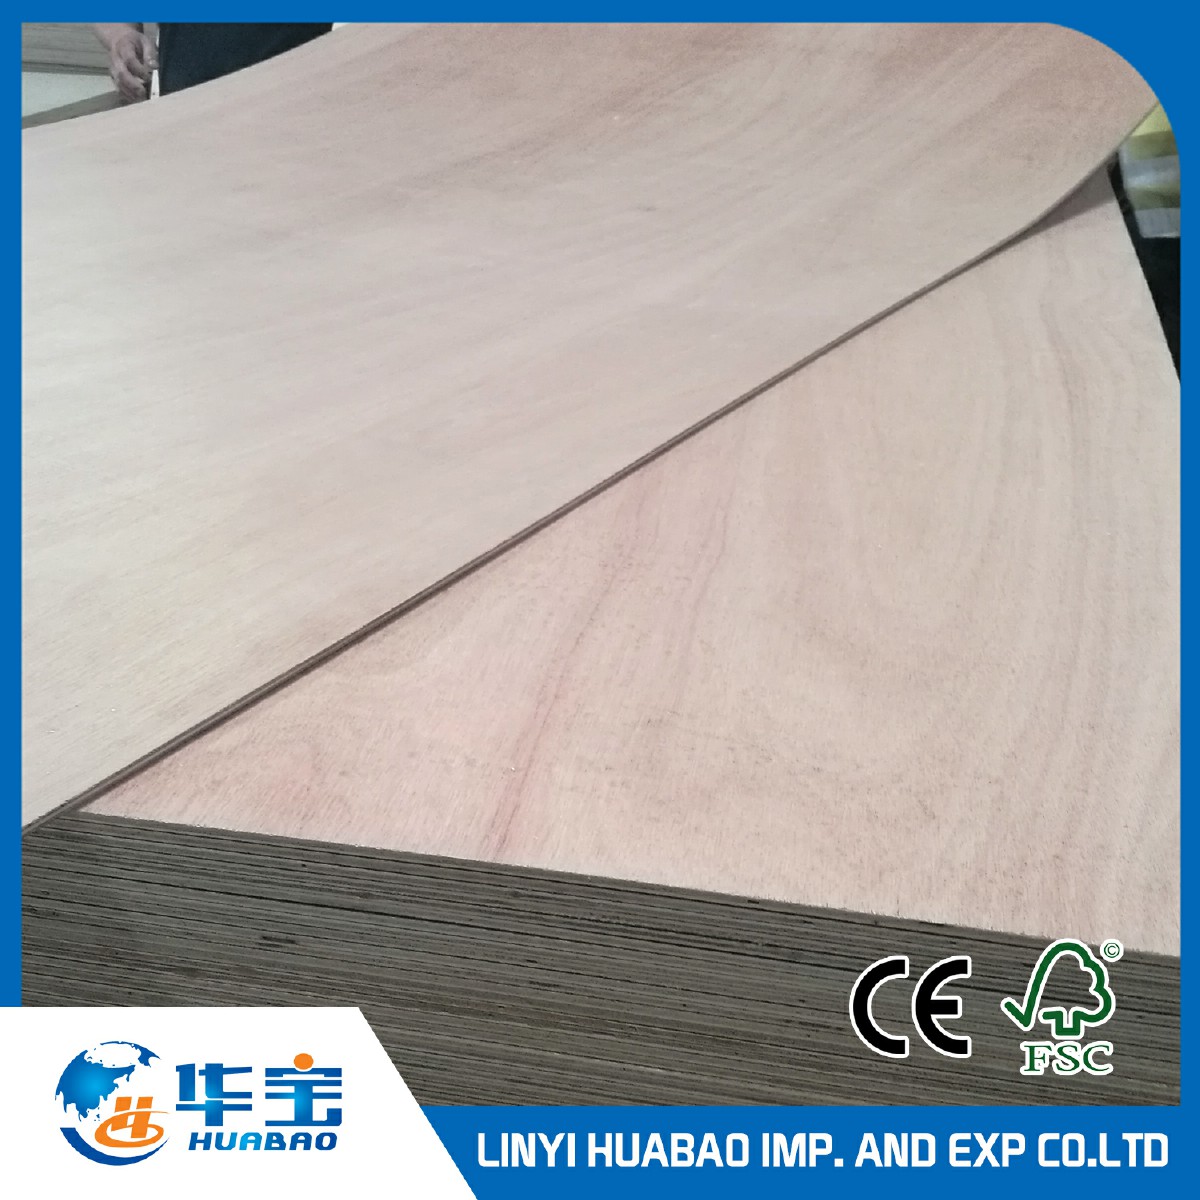 China Commercial Plywood BB/CC for Furniture